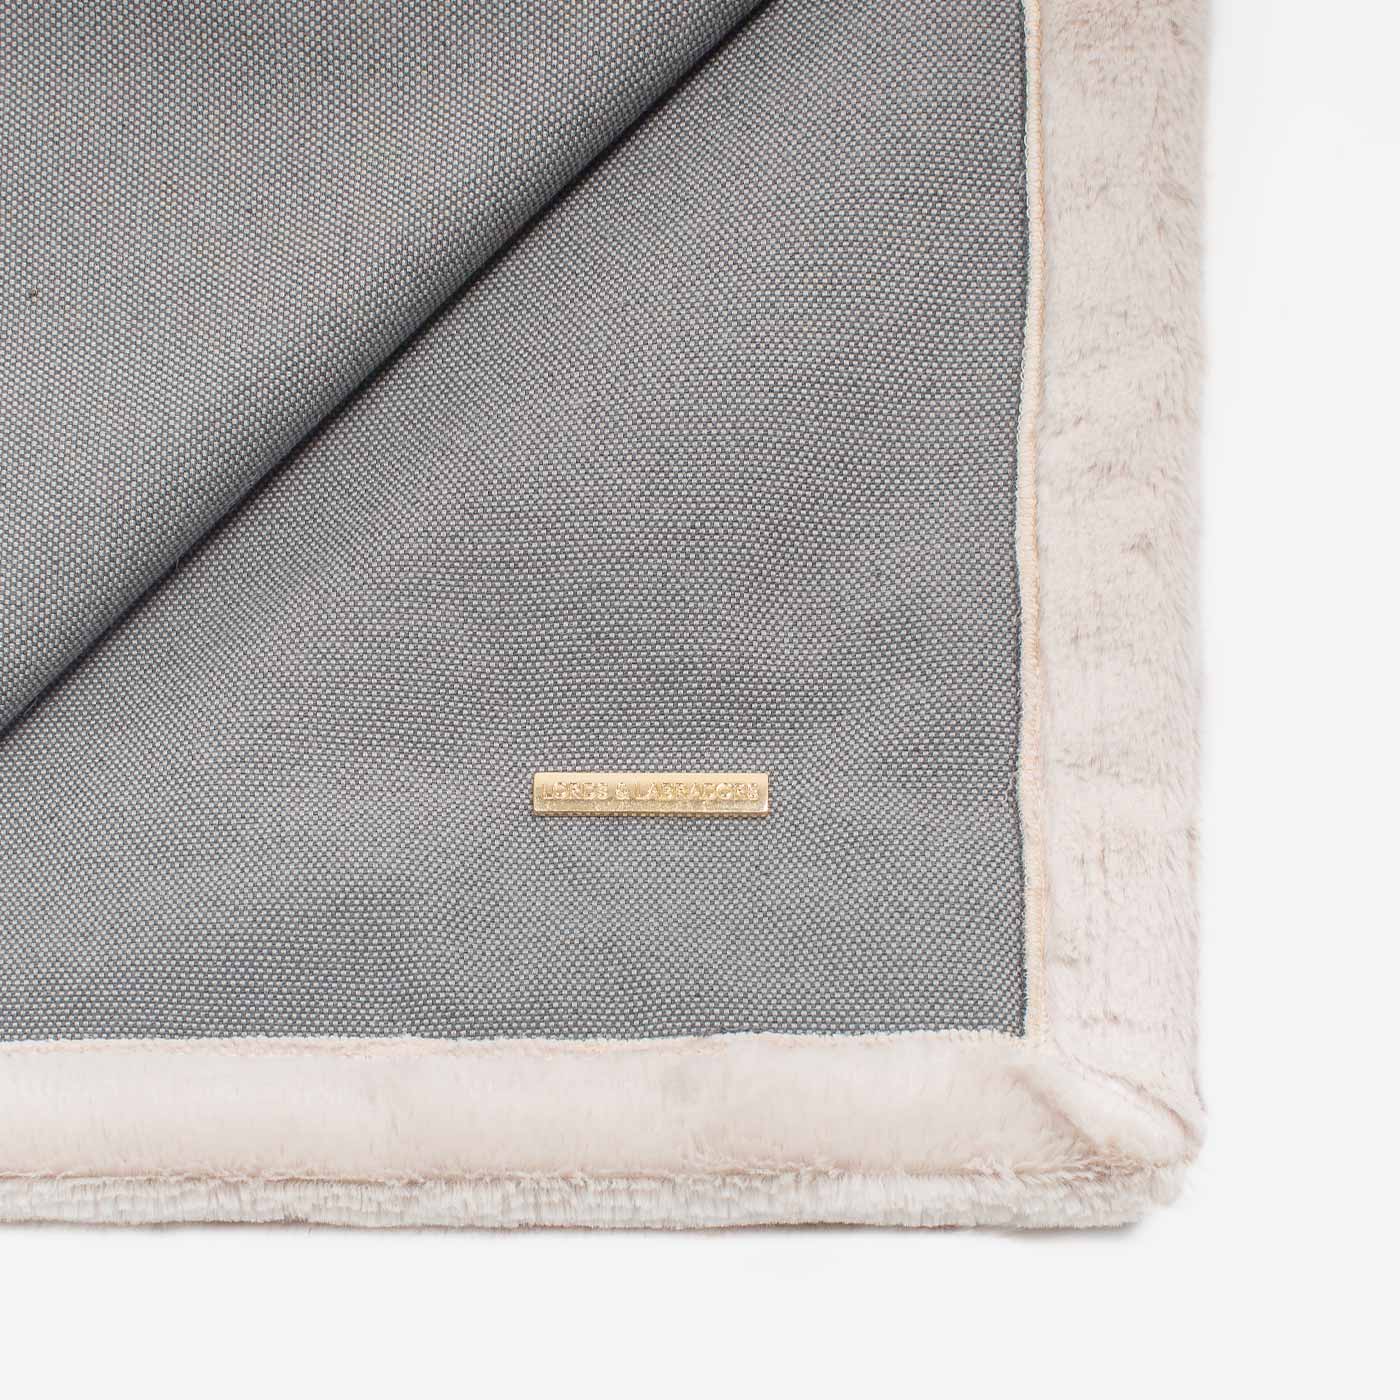 Present your furry friend with our luxuriously thick, plush blanket for your pet. Featuring a reverse side with hardwearing woven fabric handmade in Italy for the perfect high-quality pet blanket! Essentials Twill Blanket In Slate, Available now at Lords & Labradors    